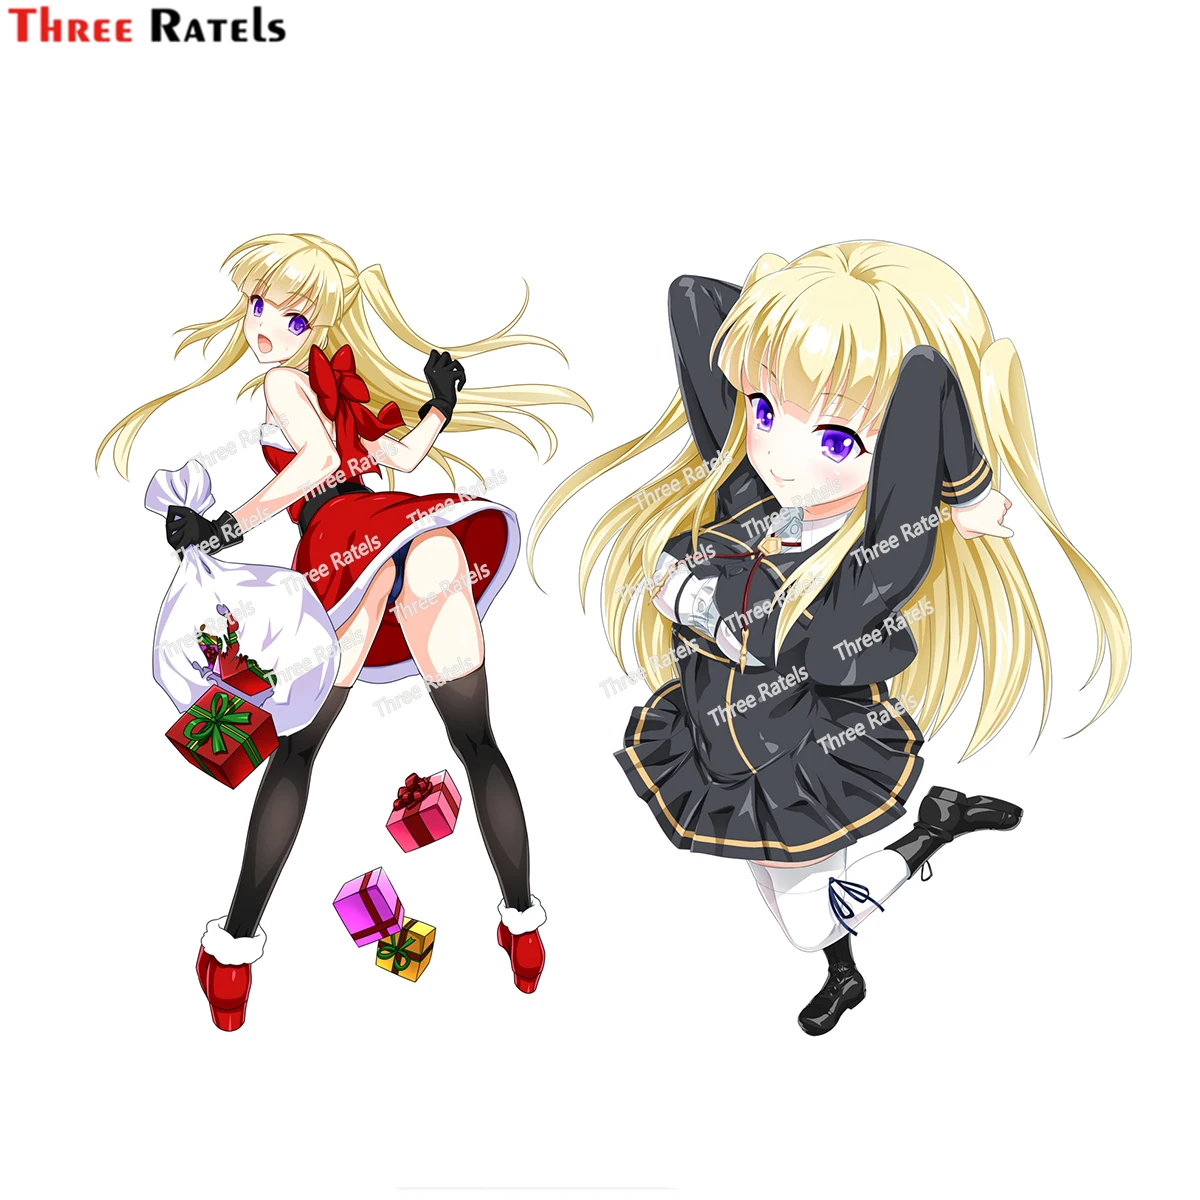 

Three Ratels H98 Henrietta Baldini Valkyrie Drive Stickers And Decals For Girl Bedroom Wall Decor Dest Refrigerator Waterproof